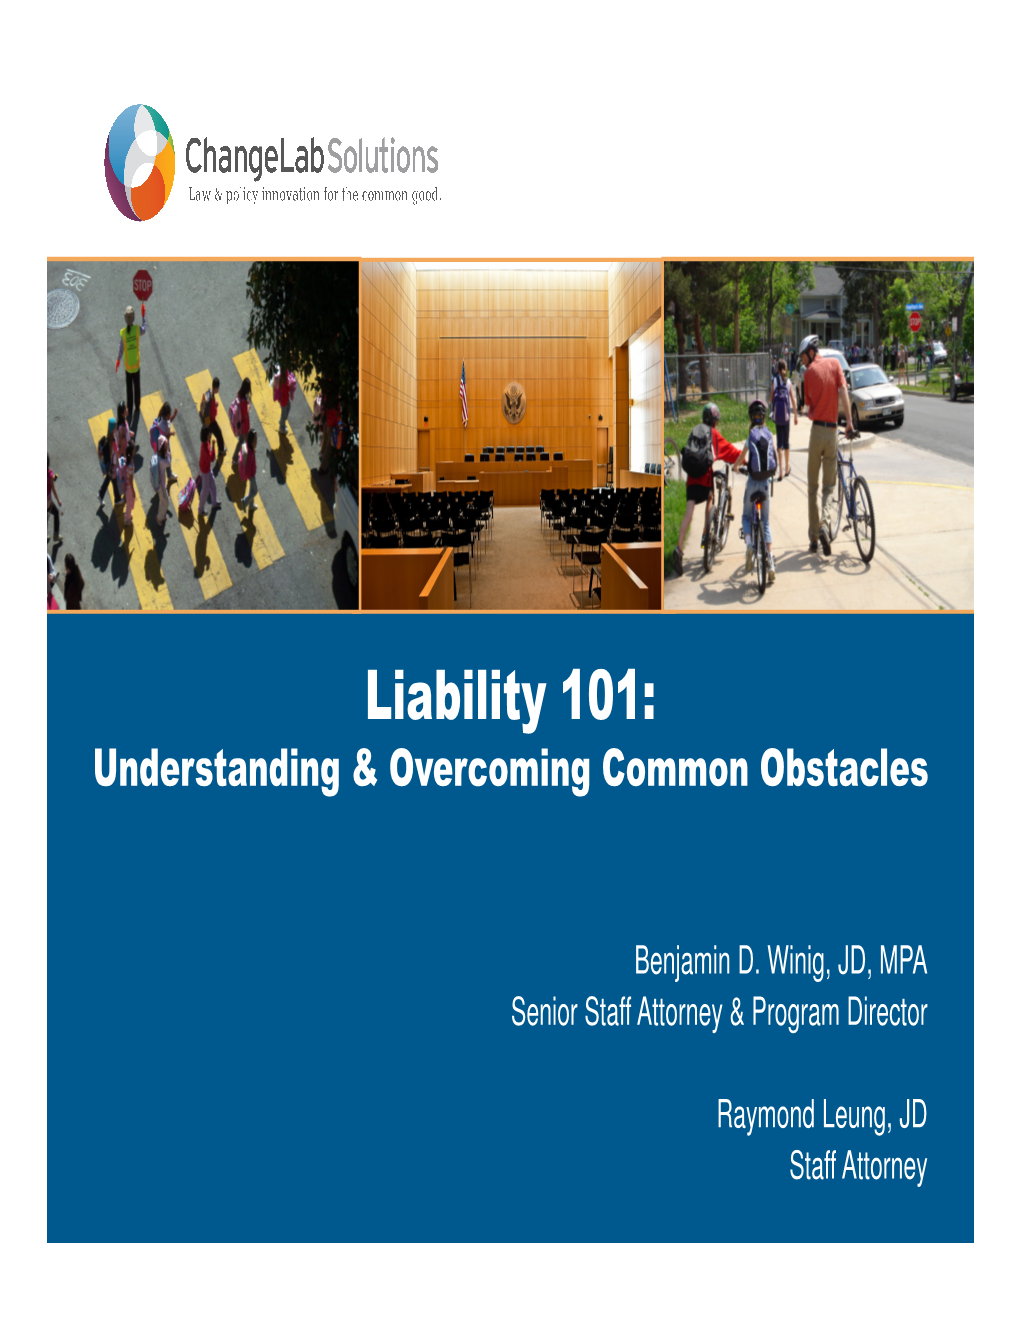 Liability 101: Understanding & Overcoming Common Obstacles